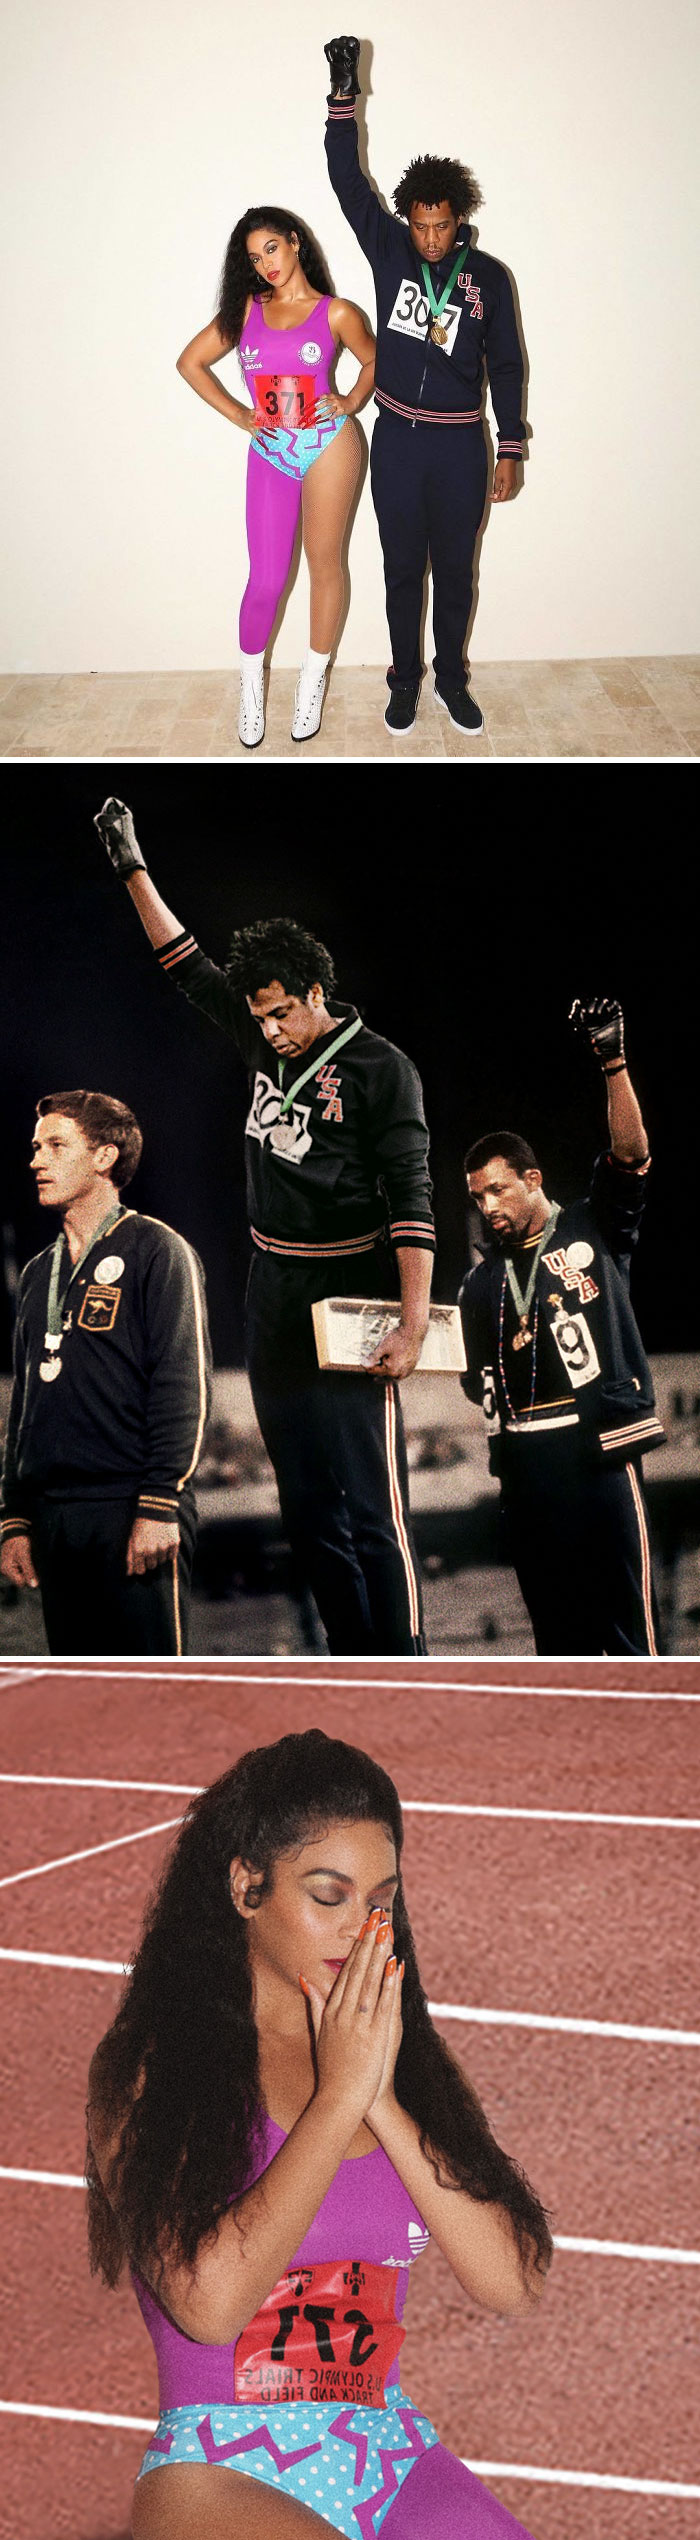 Beyoncé As Olympian Florence Griffith Joyner And Jay-Z As Tommie Smith